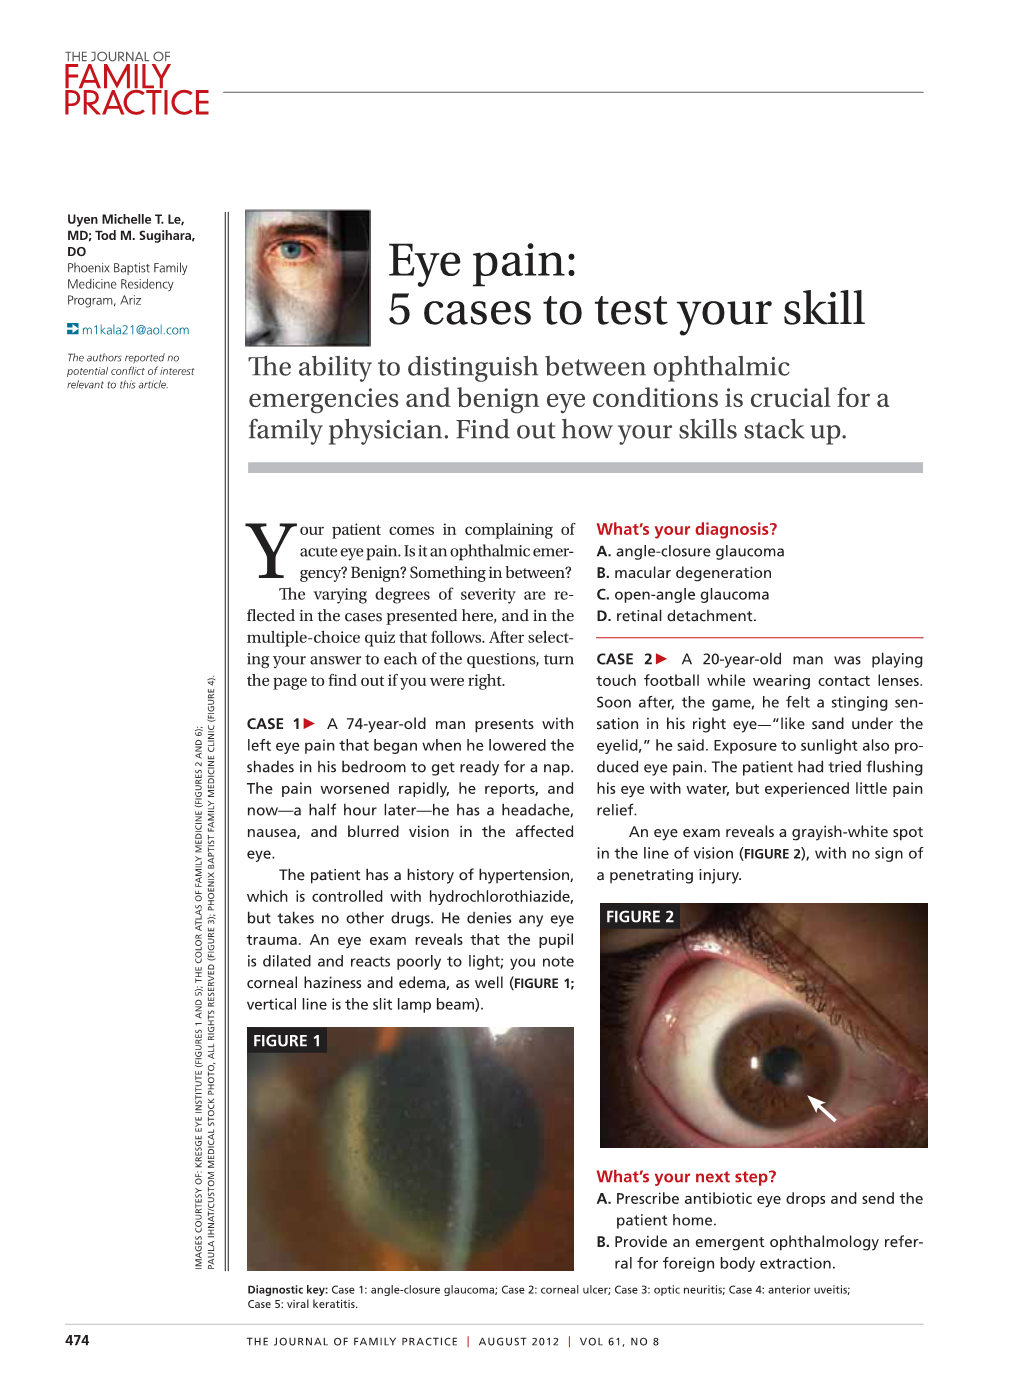 Eye Pain: 5 Cases to Test Your Skill